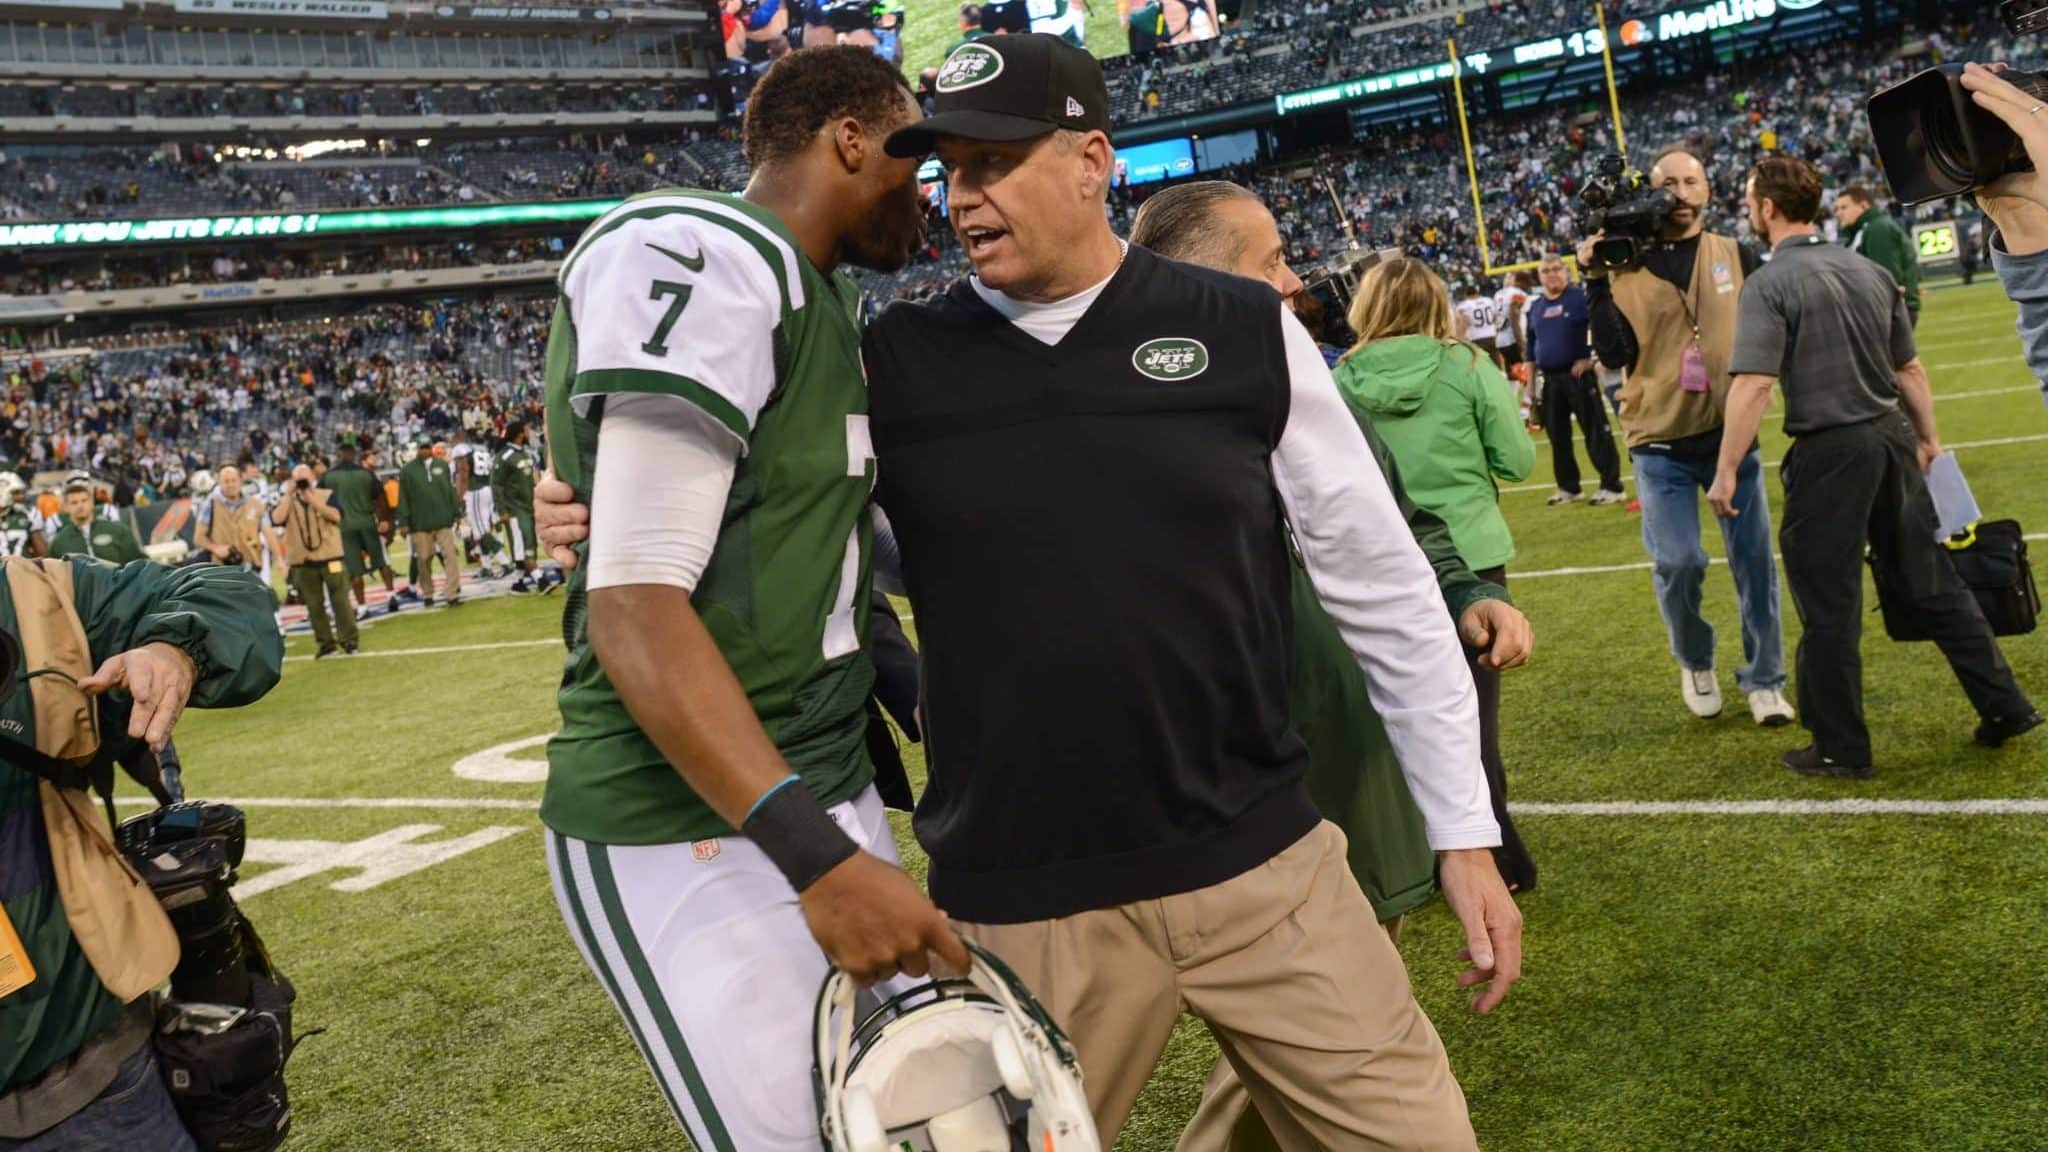 EAST RUTHERFORD, NJ - DECEMBER 22: Head coach Rex Ryan of the New York Jets and quarterback Geno Smith #7 of the New York Jets walk off together at the end of the game against the Cleveland Browns at MetLife Stadium on December 22, 2013 in East Rutherford, New Jersey.